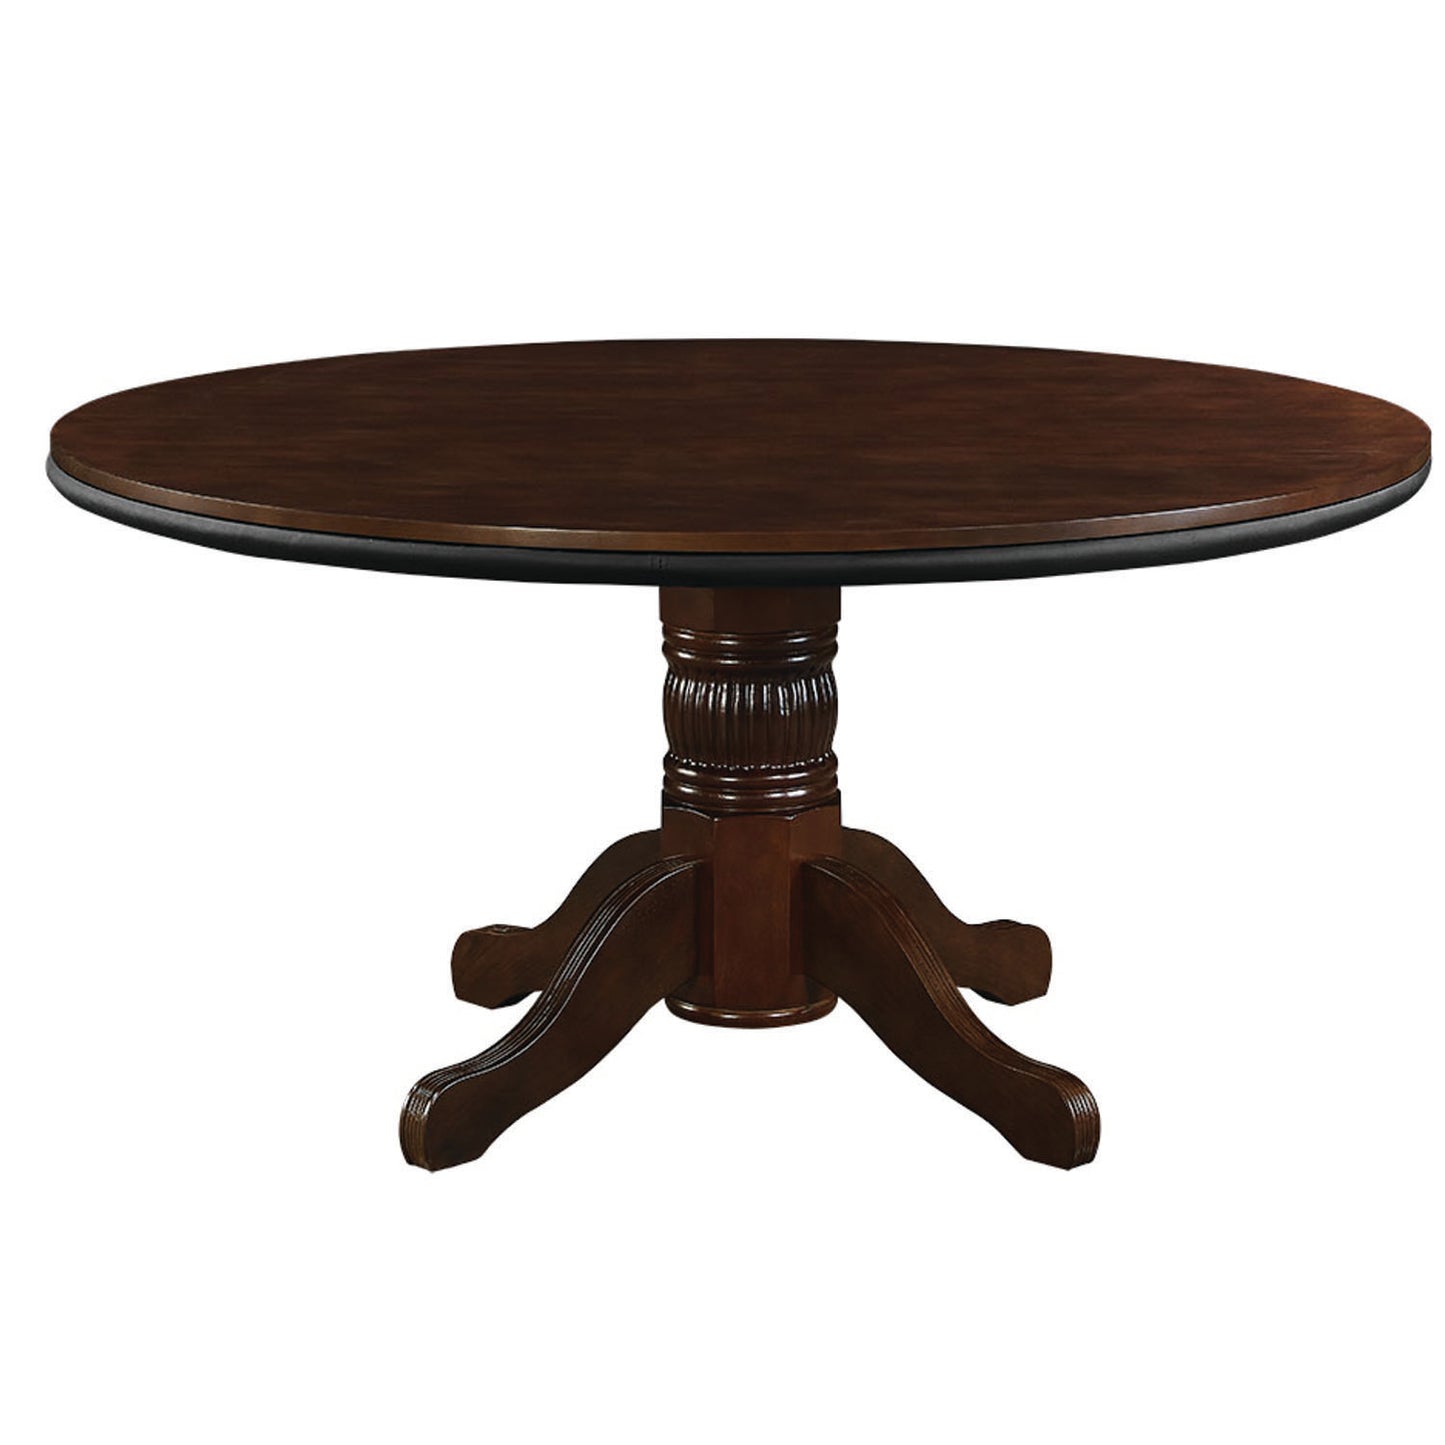 60" reversible round game table with dining top in a cappuccino finish.